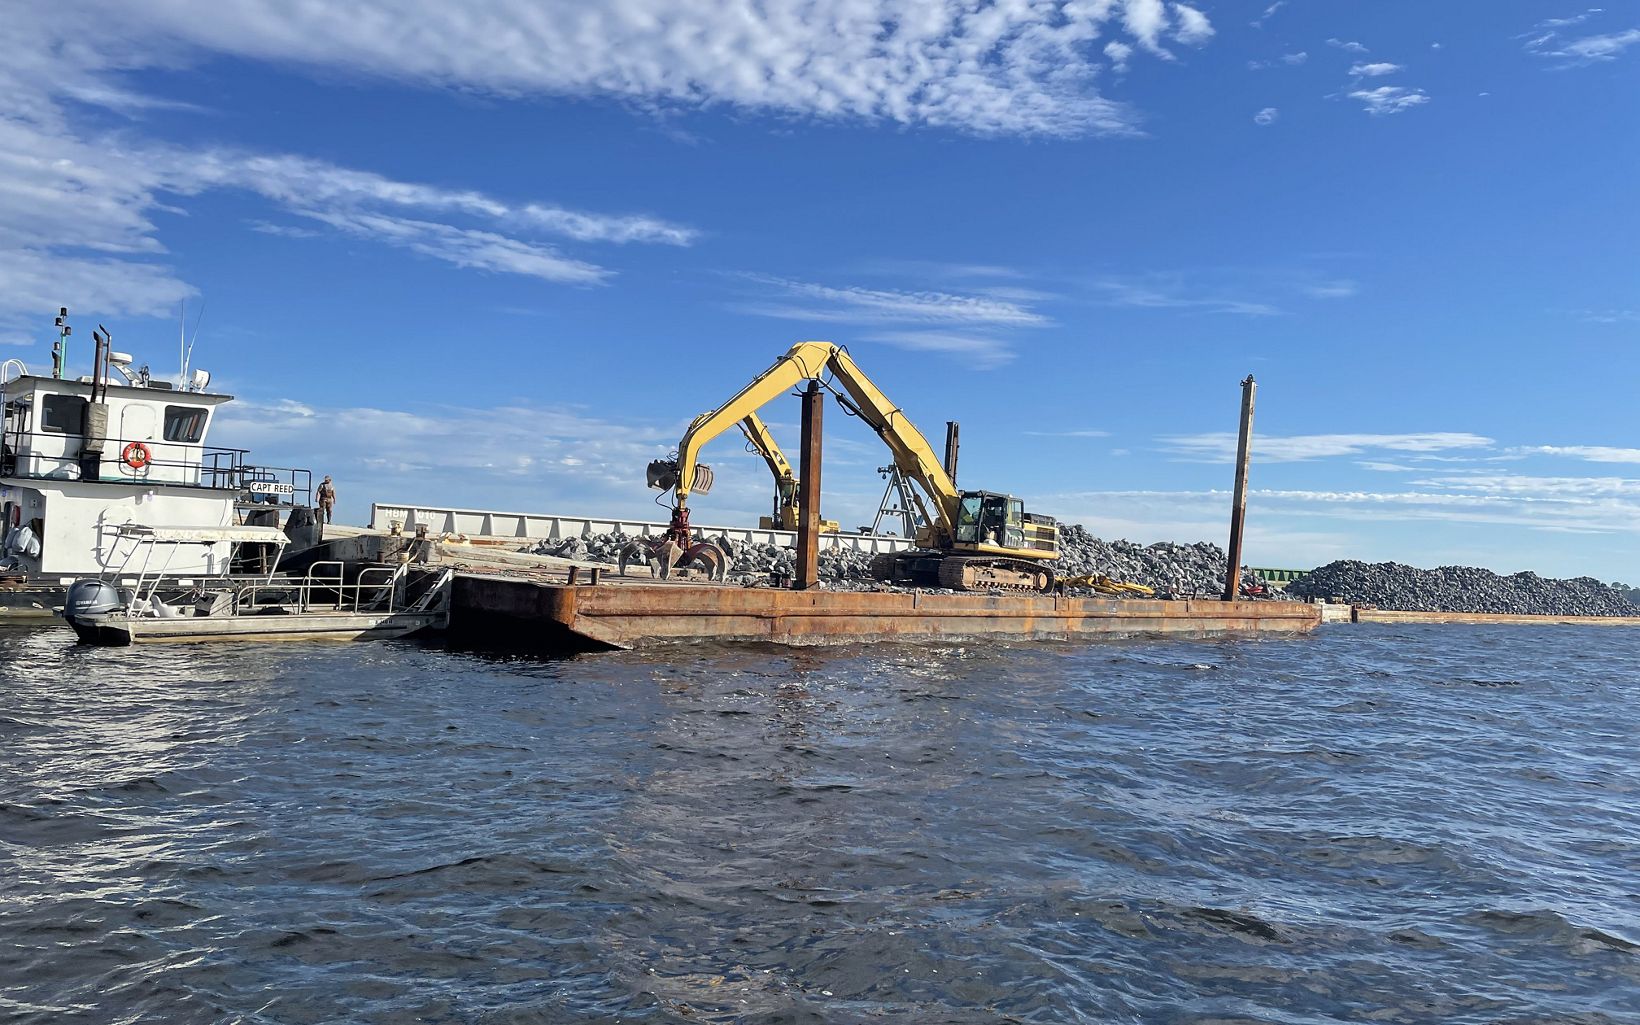 Backhoe sits atop a barge loaded with limestone rock for oyster reef construction.